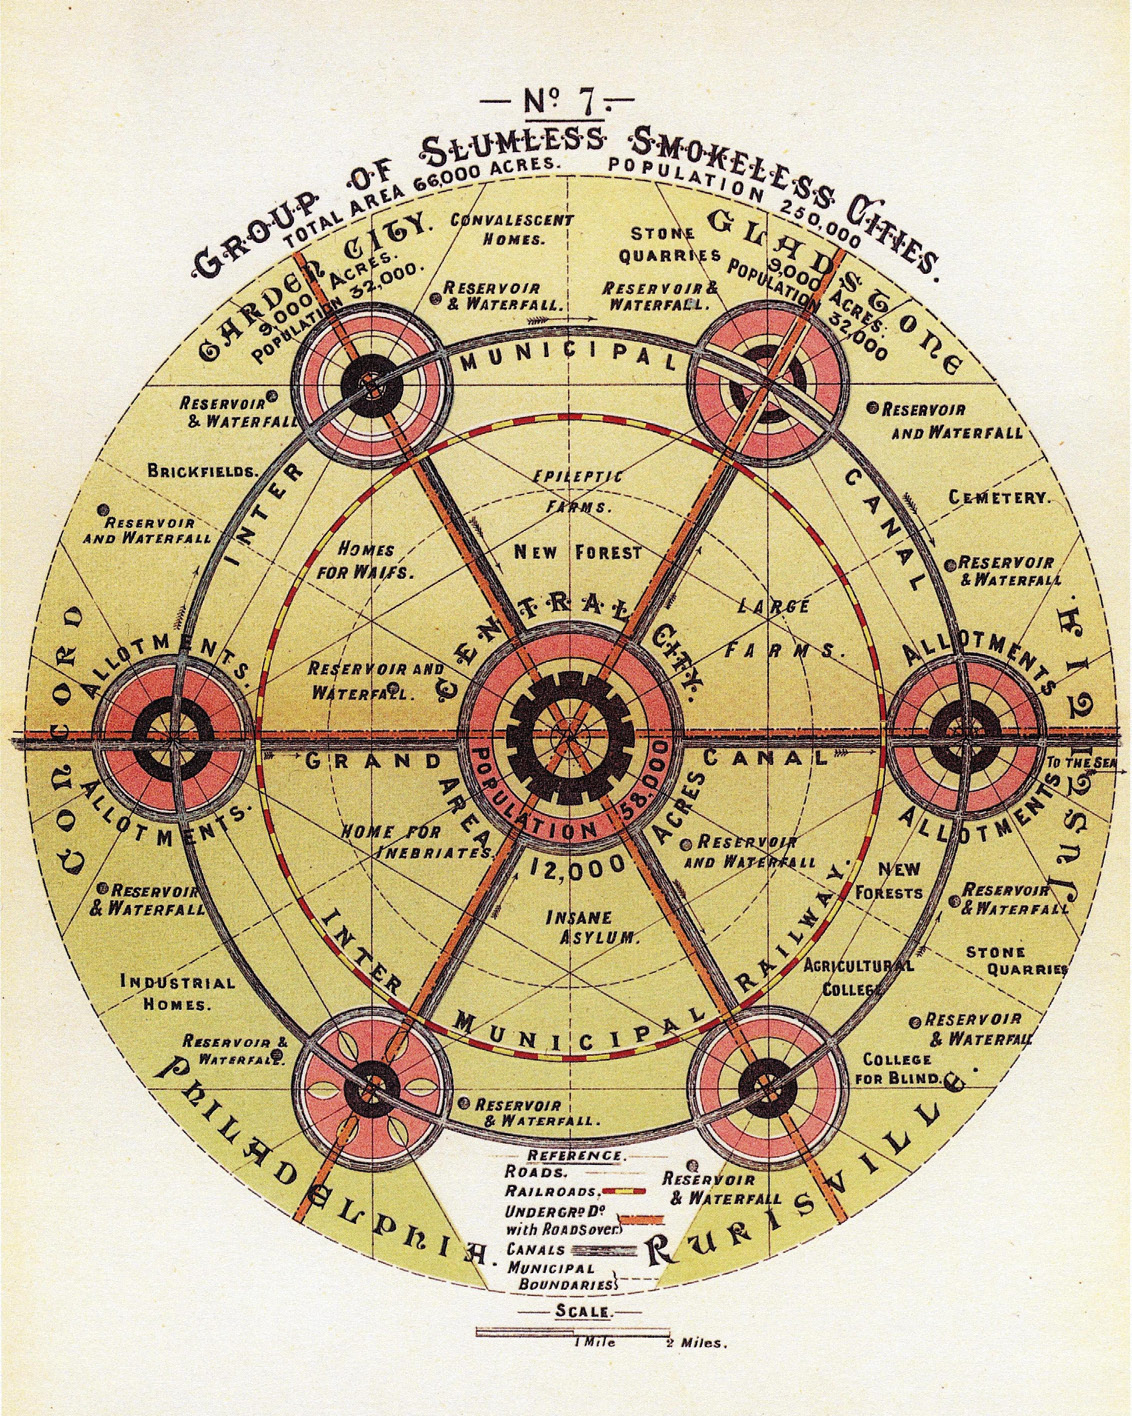 A blueprint for an 18th-century European Garden city model in color: the design shows a bird’s eye view of the city encased in one large circular perimeter; inside six smaller areas with their own perimeters surrounding and encircling the city center’s area; at the bottom a reference for roads, railroads, underground railroads, canals, and municipal boundaries; below a scale in miles.